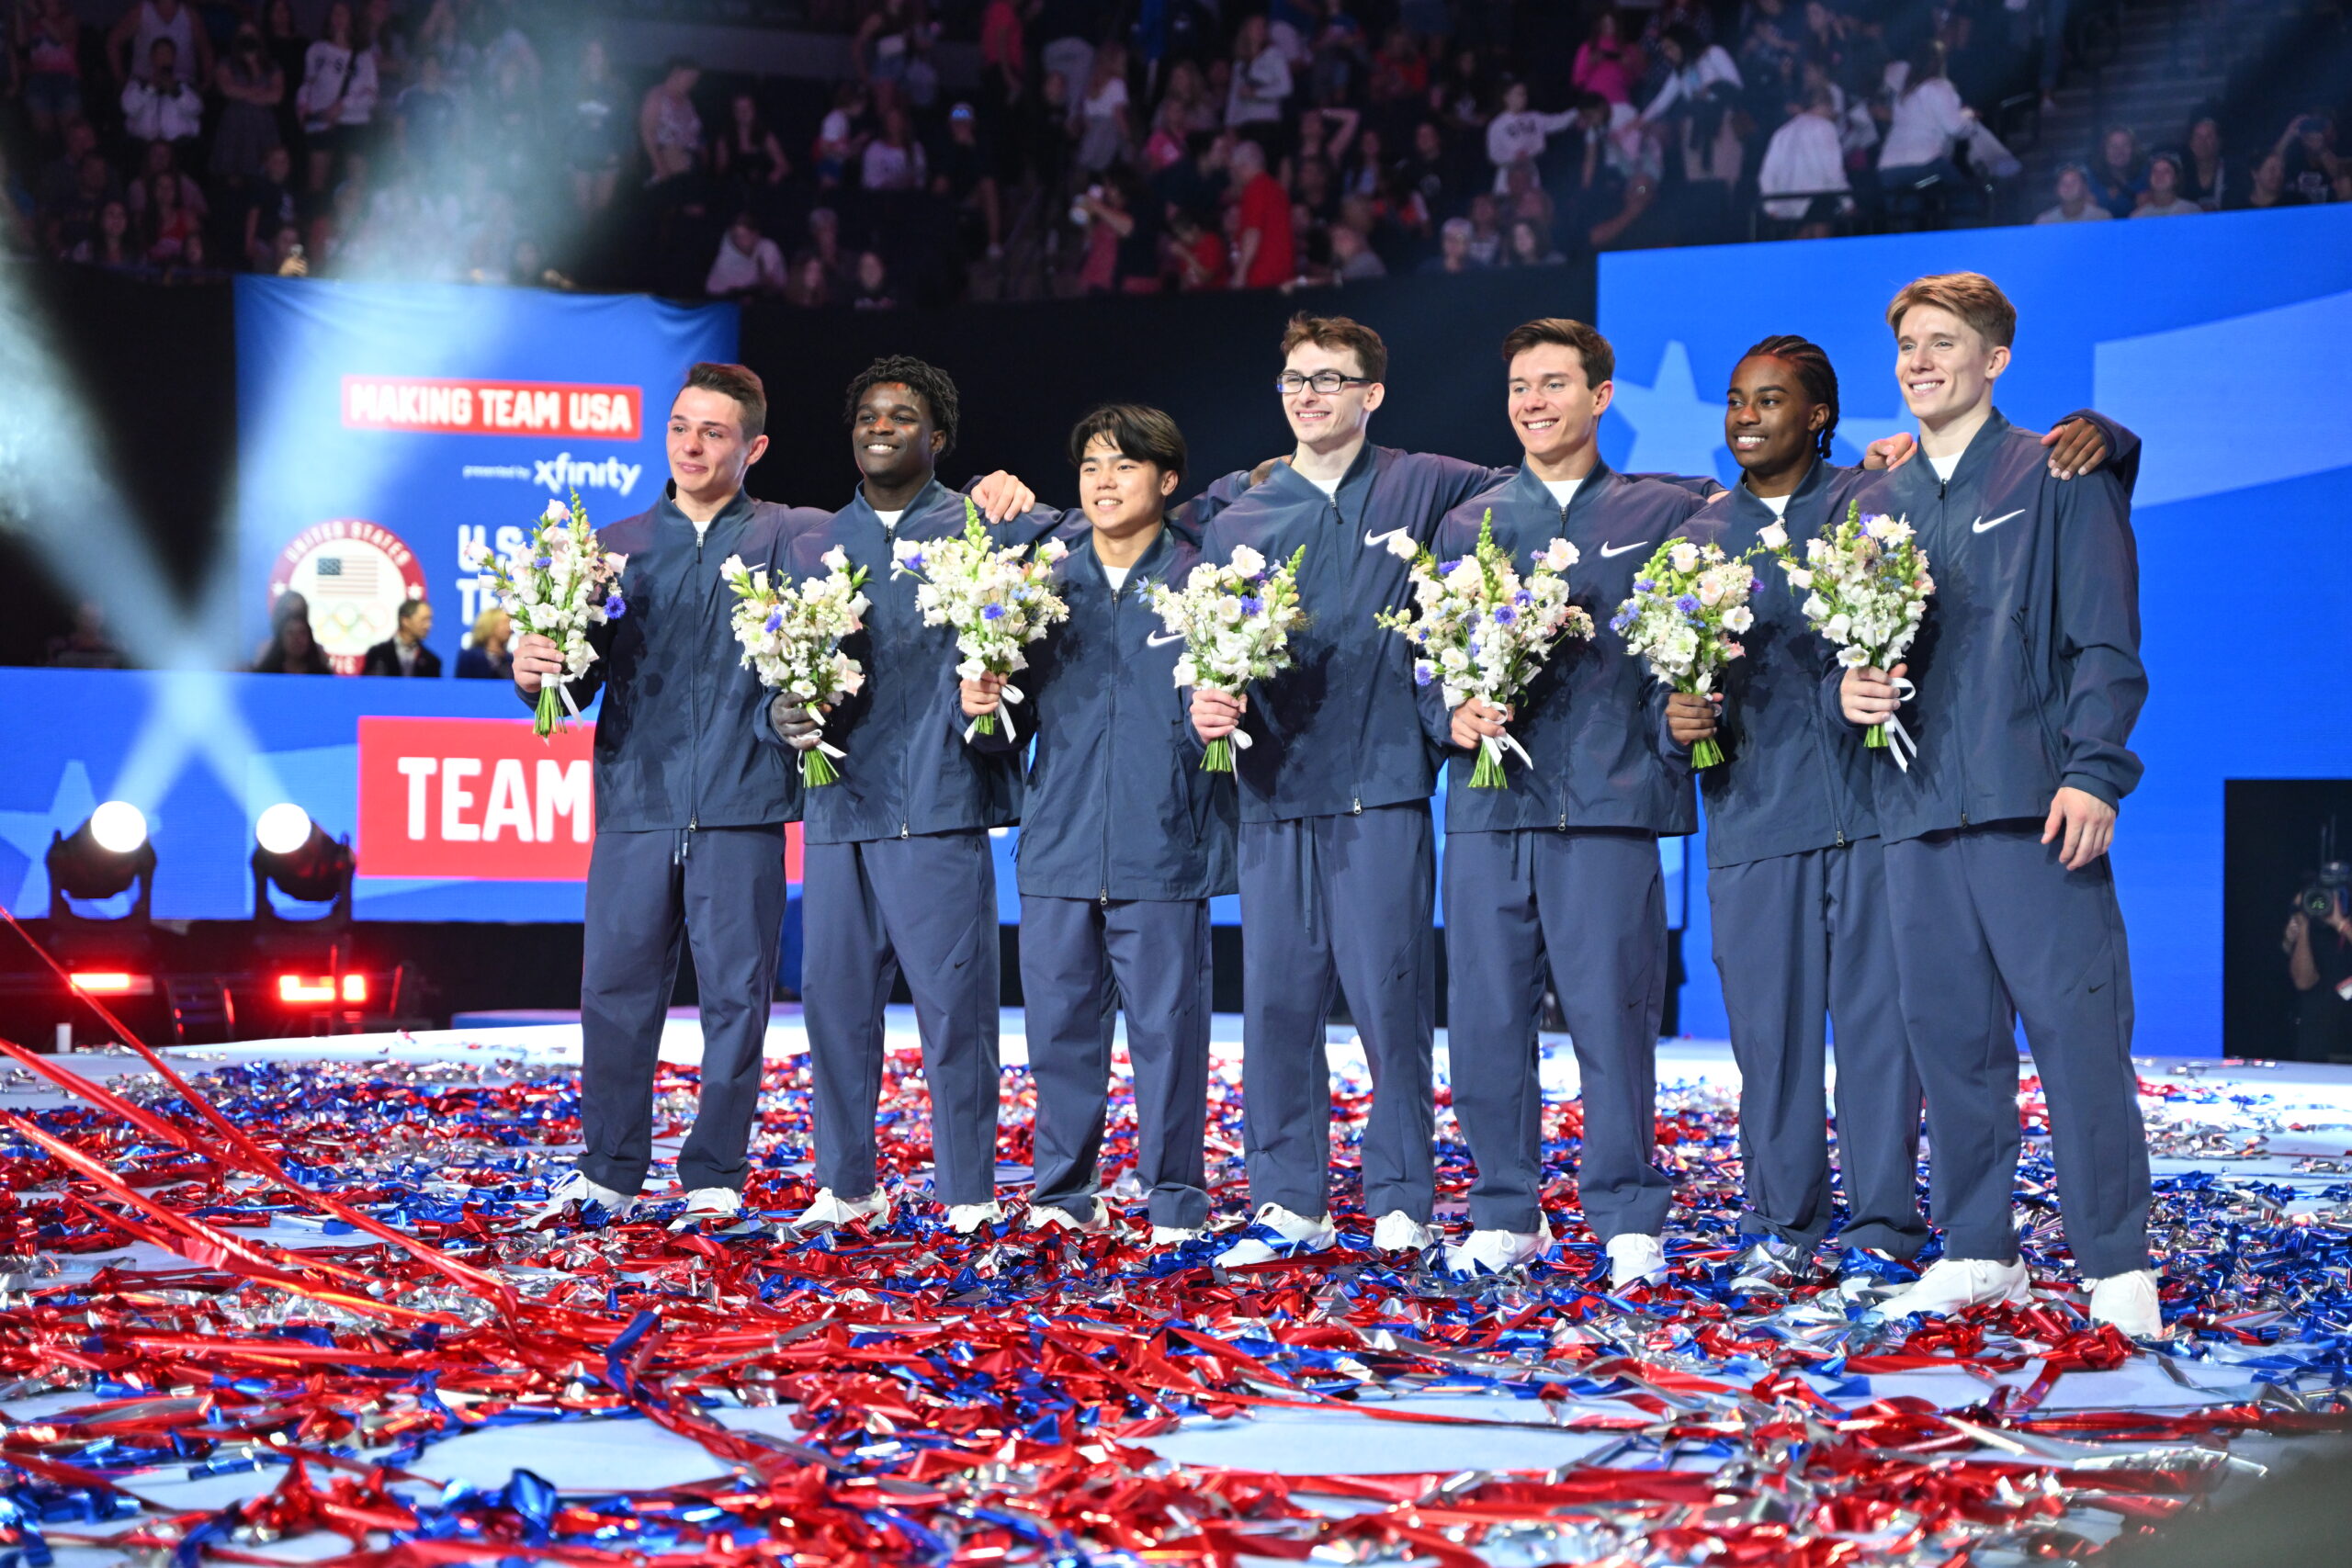 Paul Juda, Fred Richard, Asher Hong, Stephen Nedoroscik, Brody Malone, Khoi Young, and Shane Wiskus after being named to the U.S. men's gymnastics team for the 2024 Paris Olympic Games.